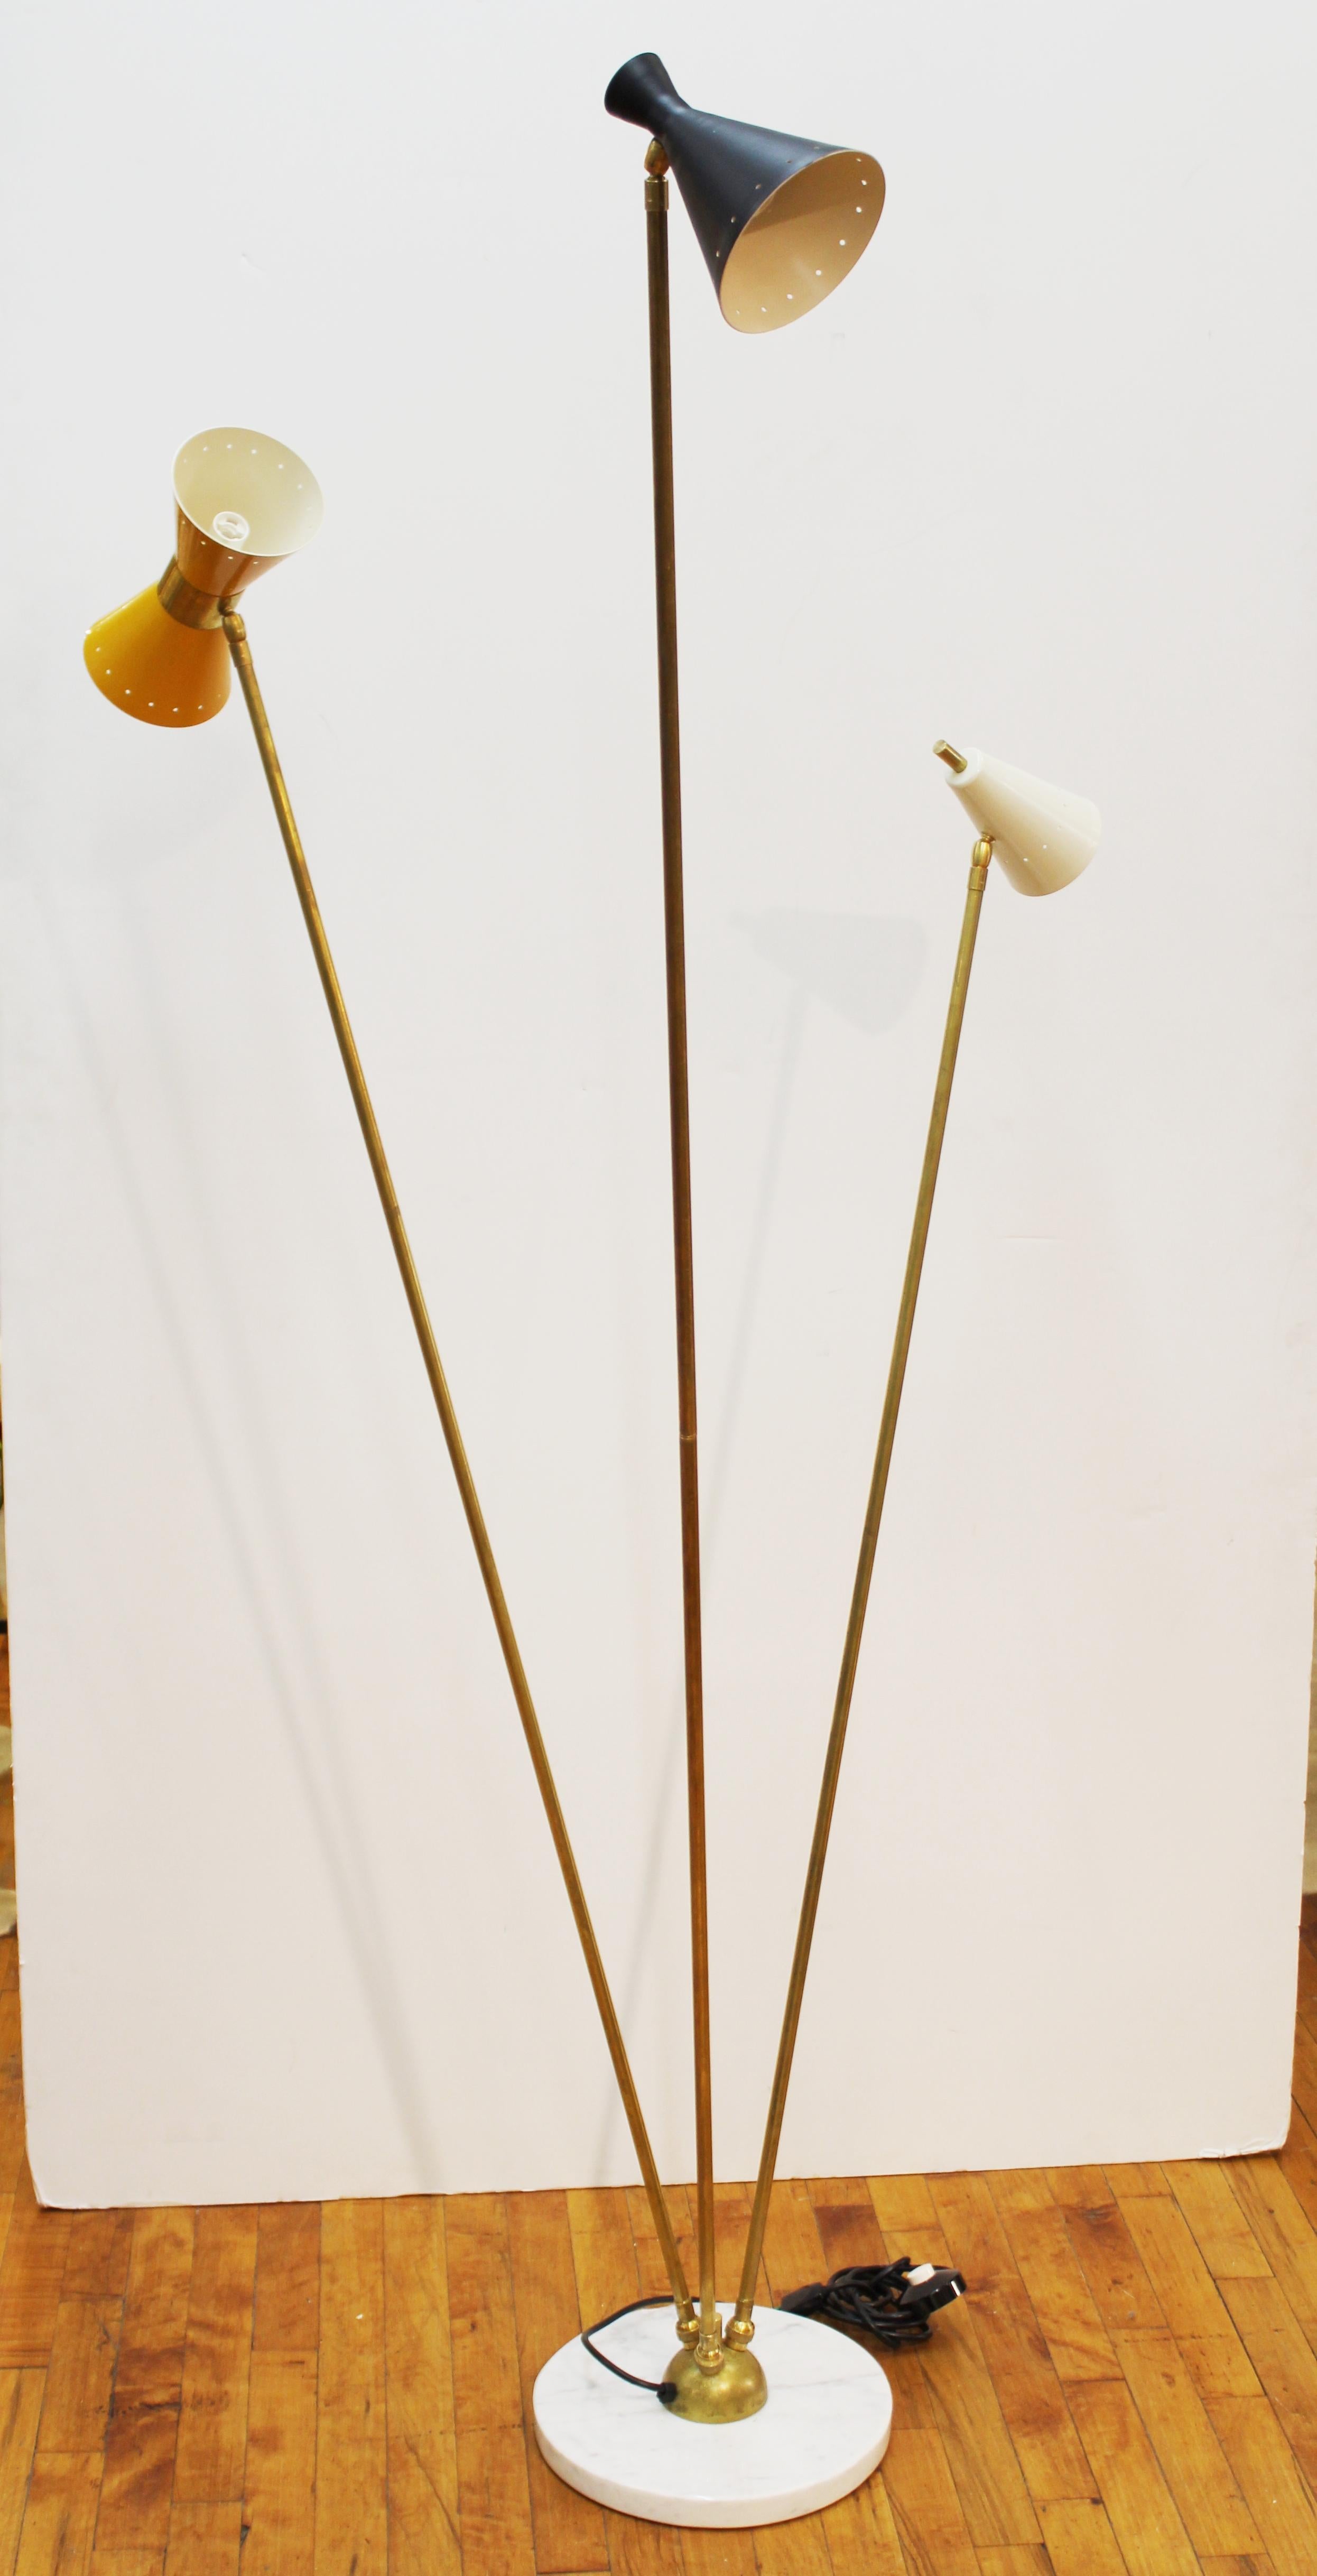 Italian midcentury style Stilnovo style floor lamp with round white marble base and 3 multi-color light stems and perforated enameled metal shades. In great vintage condition with age-appropriate wear.